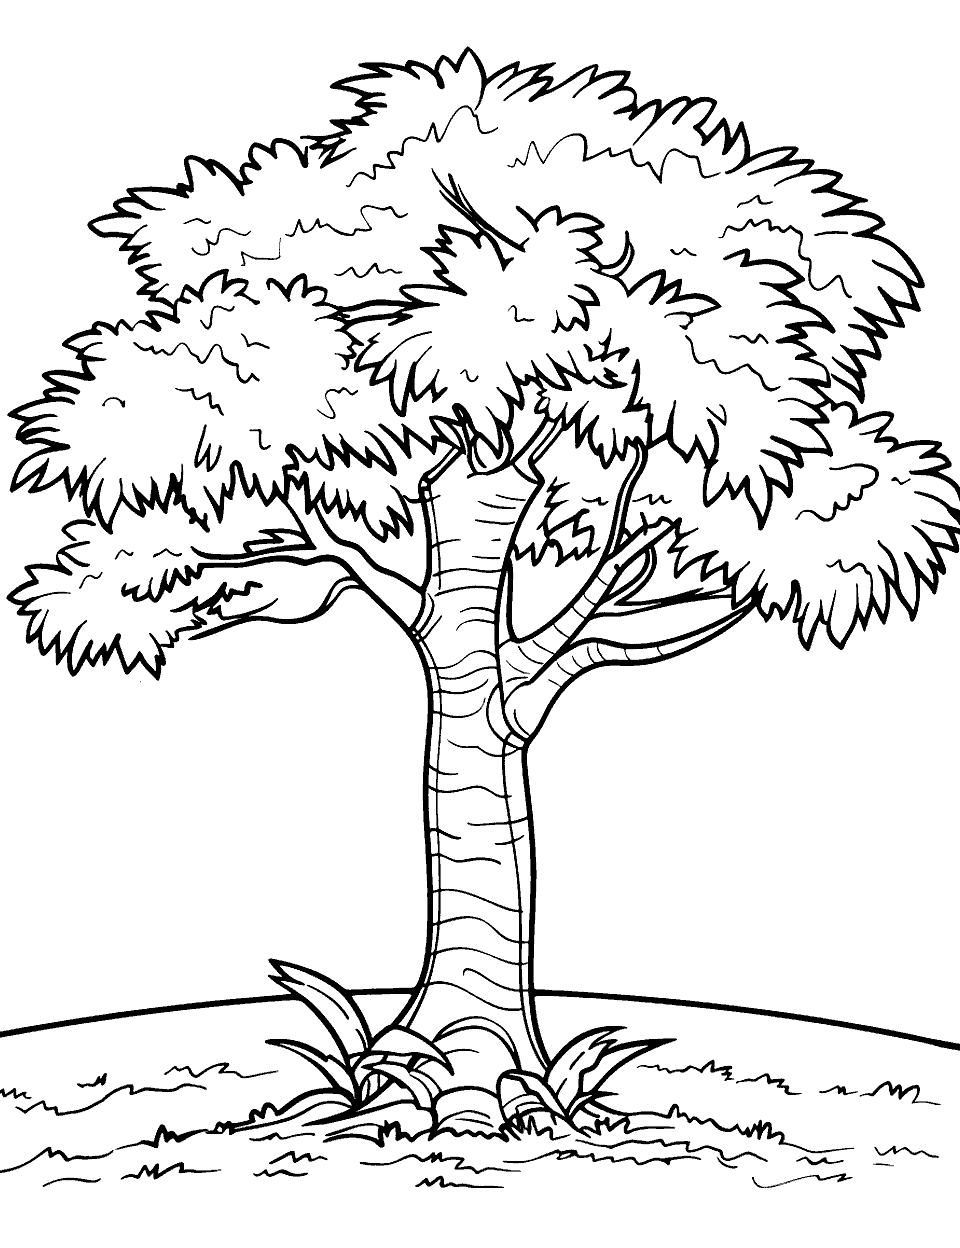 Majestic Oak Tree Coloring Page - An imposing oak tree with a wide canopy providing shade.